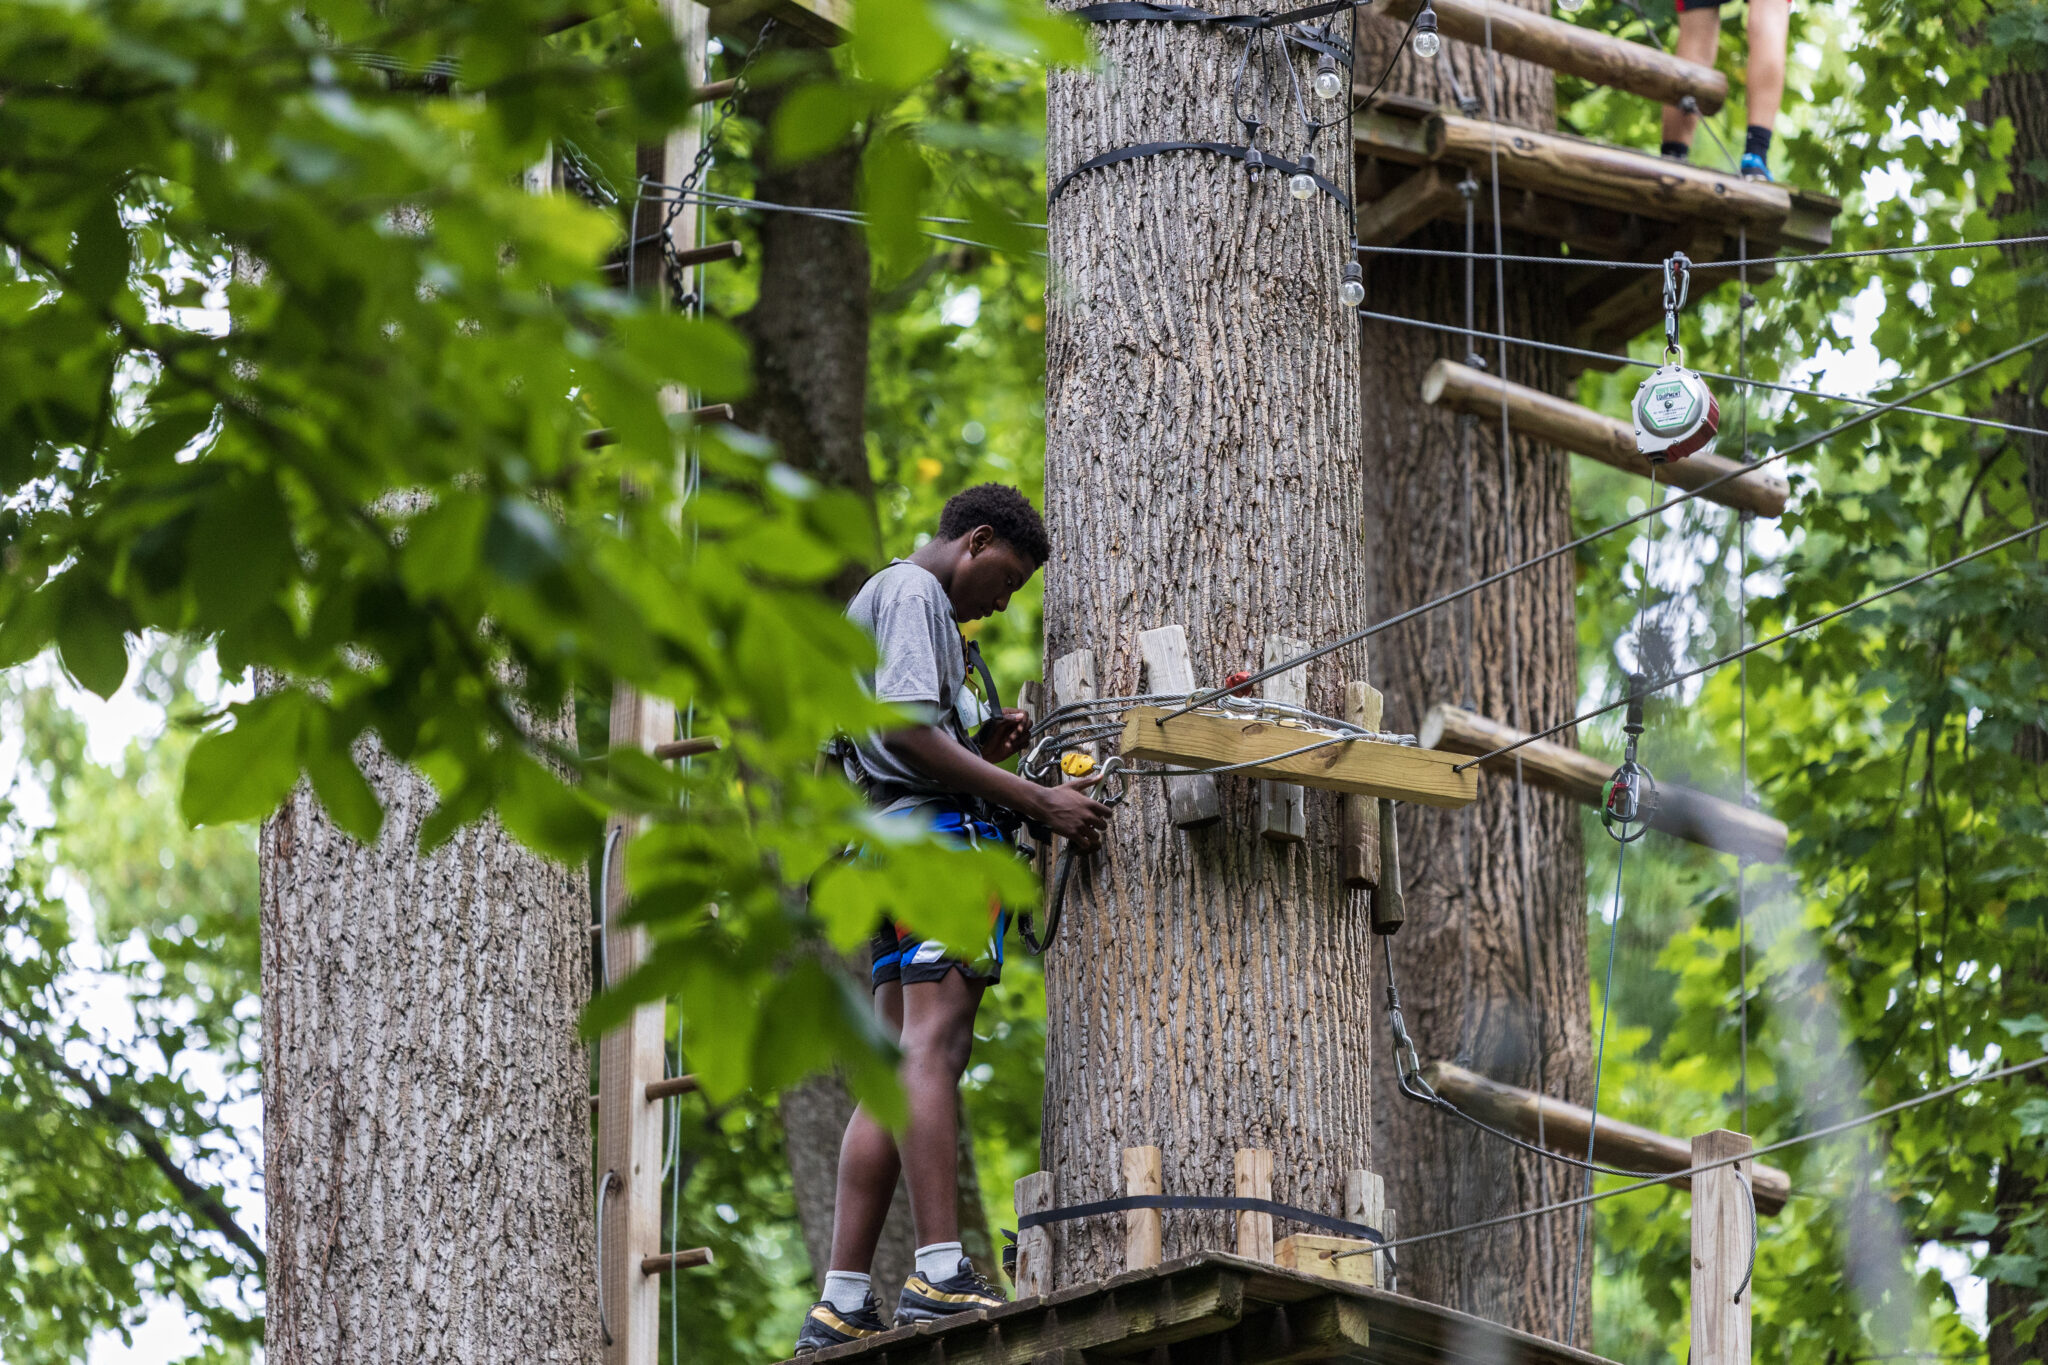 A man participating in the P.L.E.D.G.E. Leadership Program navigating a challenging ropes course set in the picturesque woods.